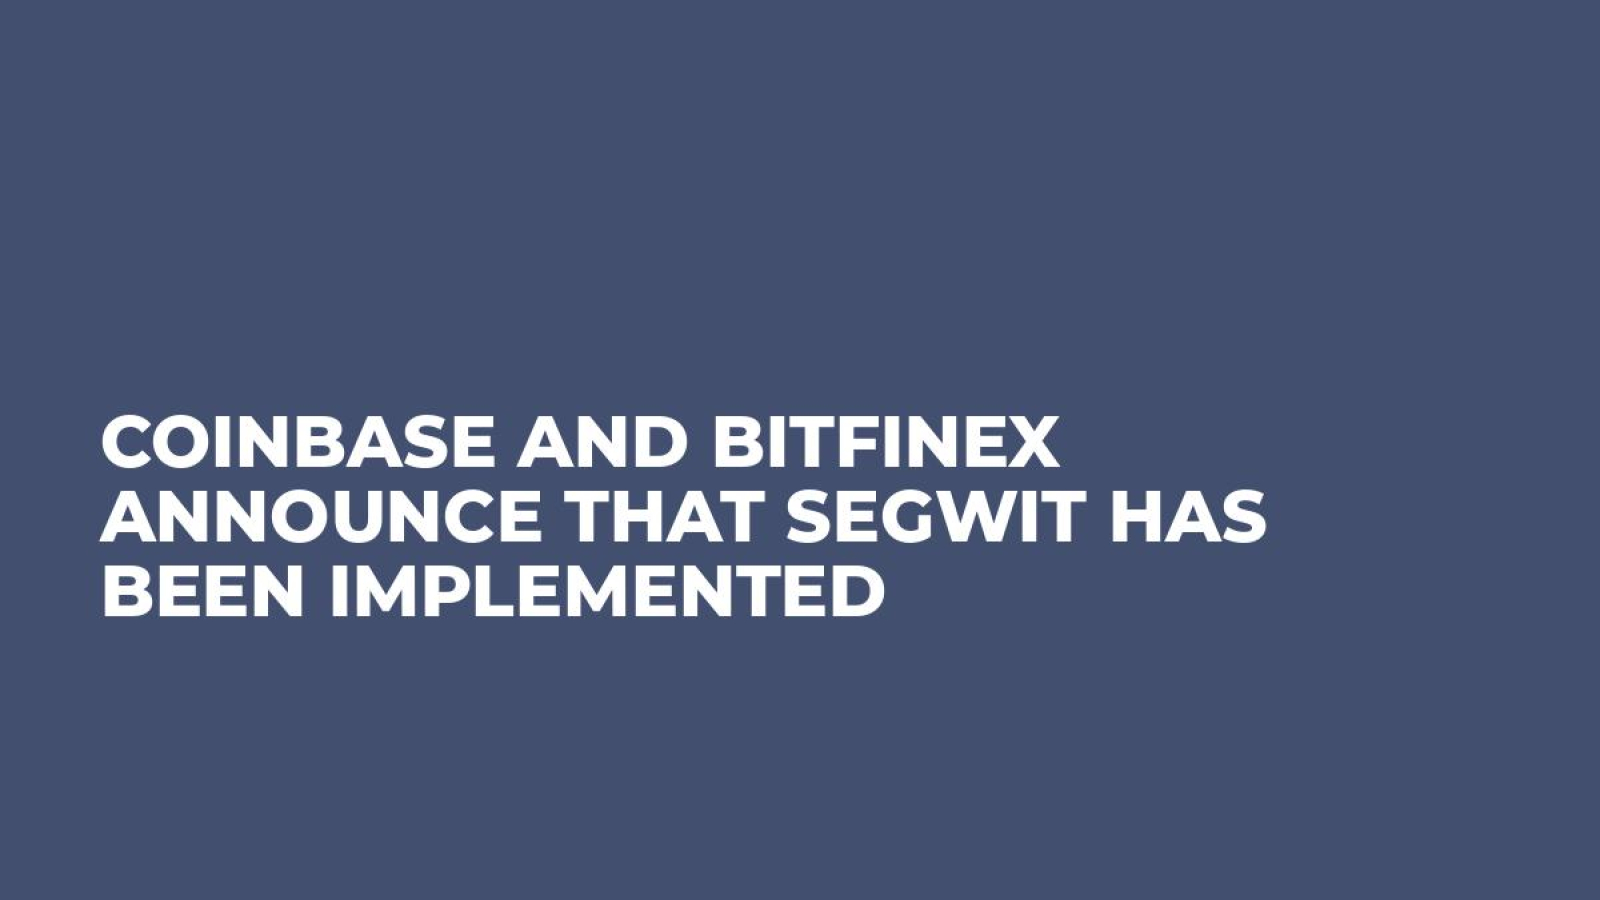 Coinbase and Bitfinex Announce that Segwit Has Been Implemented